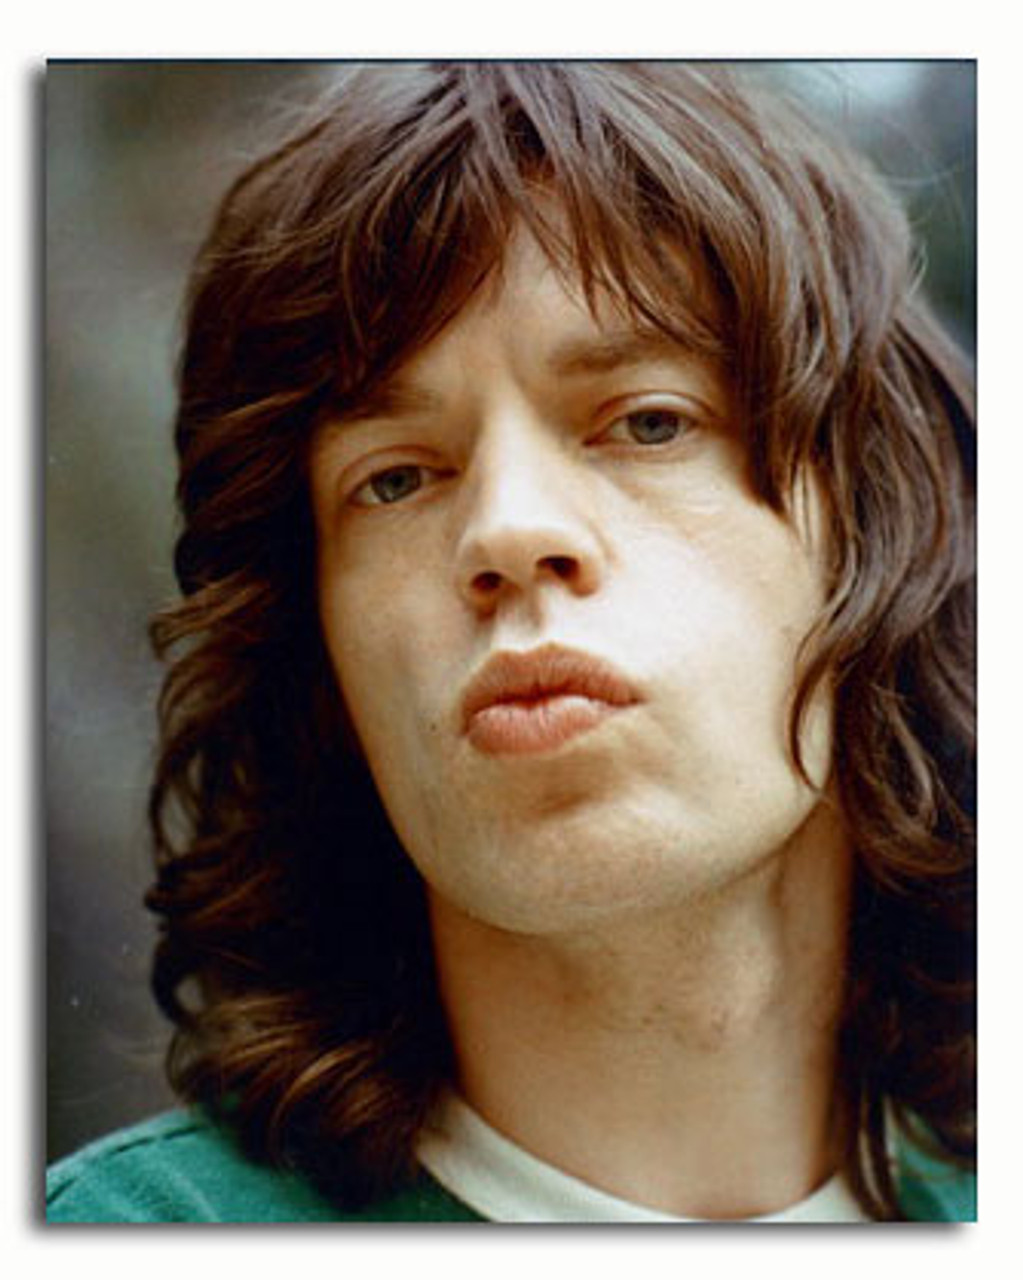 (SS2860975) Music picture of Mick Jagger buy celebrity photos and ...